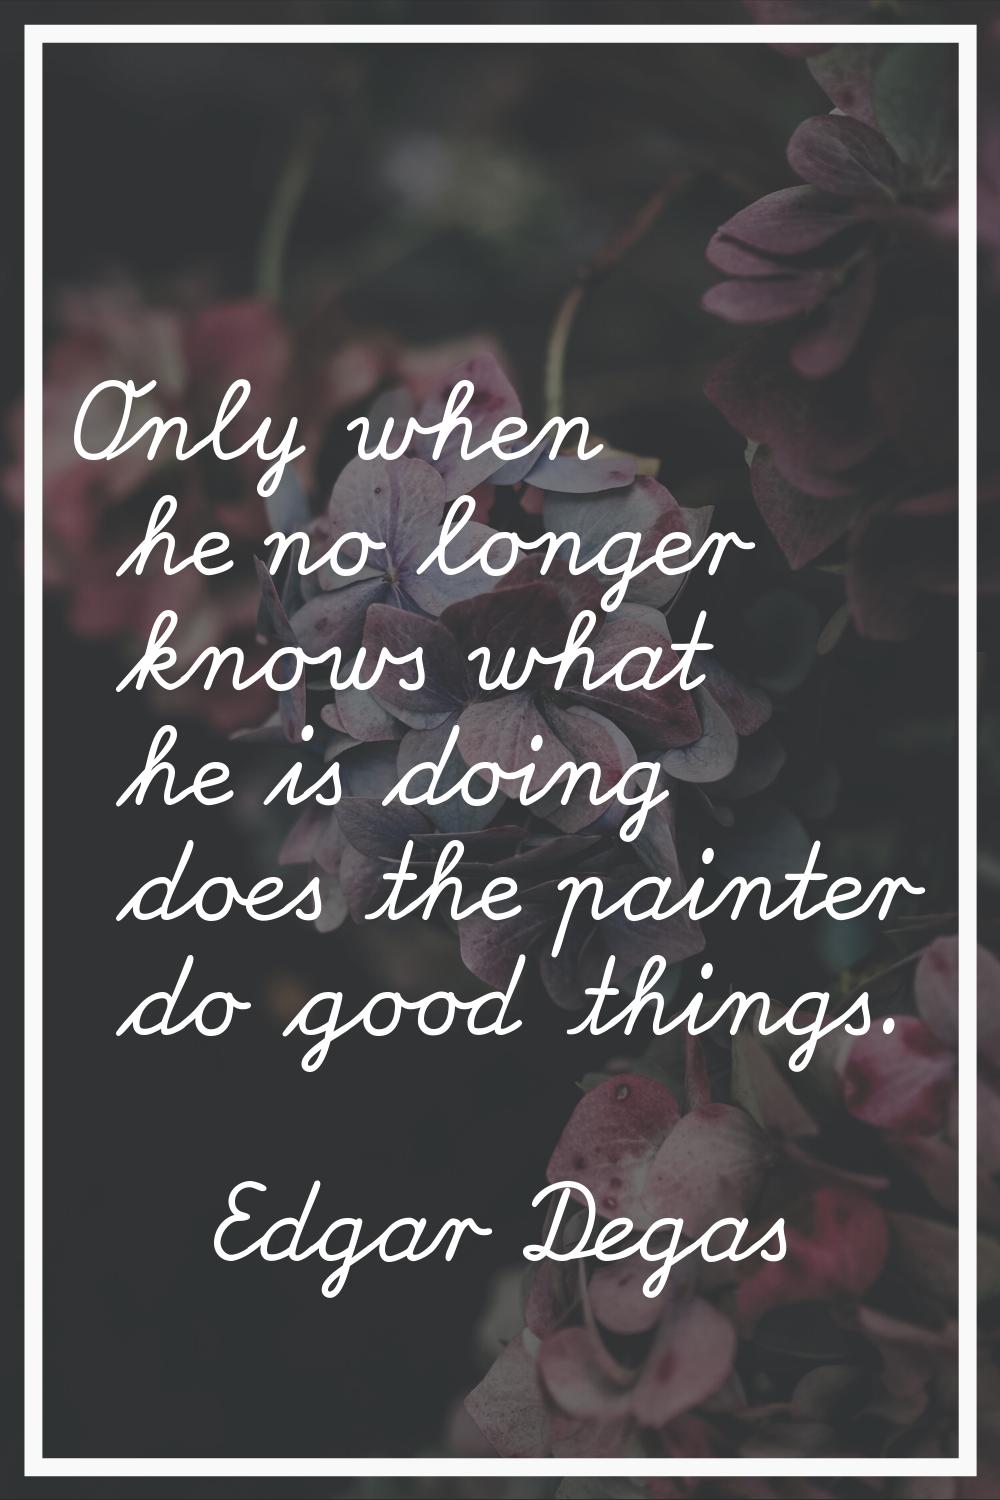 Only when he no longer knows what he is doing does the painter do good things.